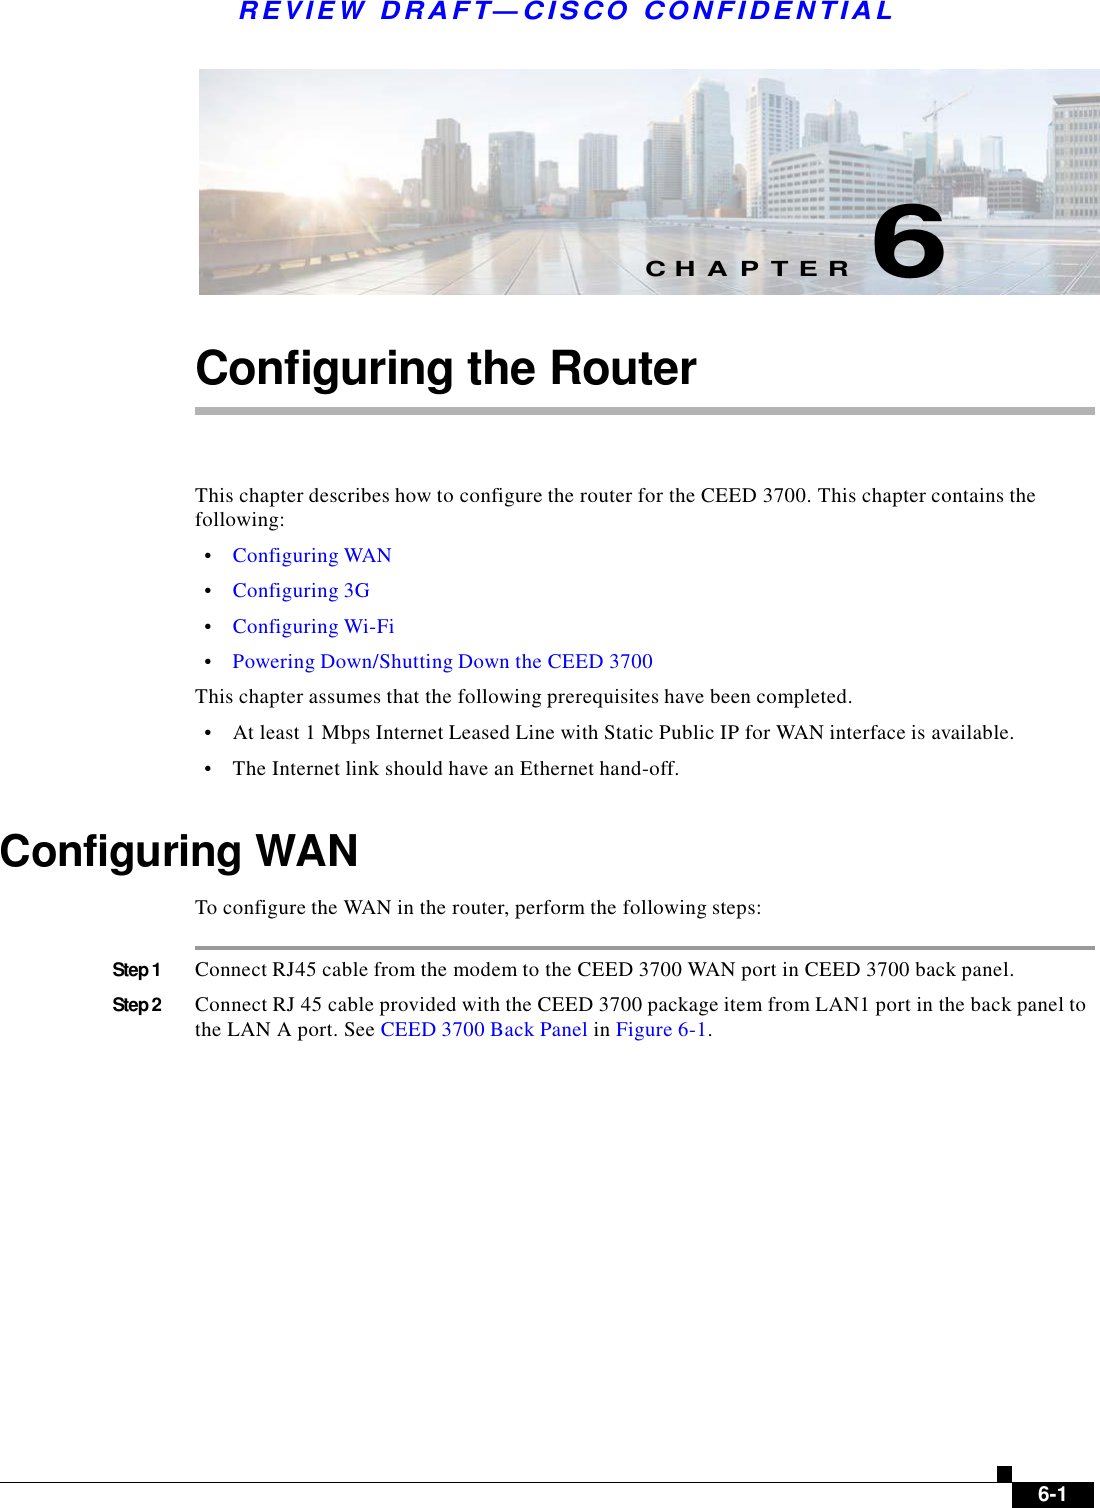    R E V I E W  DR AFT — CISC O  C O NF IDE N TIAL          C H A P T E R  6   Configuring the Router     This chapter describes how to configure the router for the CEED 3700. This chapter contains the following:  •    Configuring WAN  •    Configuring 3G  •    Configuring Wi-Fi  •    Powering Down/Shutting Down the CEED 3700  This chapter assumes that the following prerequisites have been completed.  •    At least 1 Mbps Internet Leased Line with Static Public IP for WAN interface is available.  •    The Internet link should have an Ethernet hand-off.   Configuring WAN  To configure the WAN in the router, perform the following steps:   Step 1  Connect RJ45 cable from the modem to the CEED 3700 WAN port in CEED 3700 back panel.  Step 2  Connect RJ 45 cable provided with the CEED 3700 package item from LAN1 port in the back panel to the LAN A port. See CEED 3700 Back Panel in Figure 6-1.                         6-1 